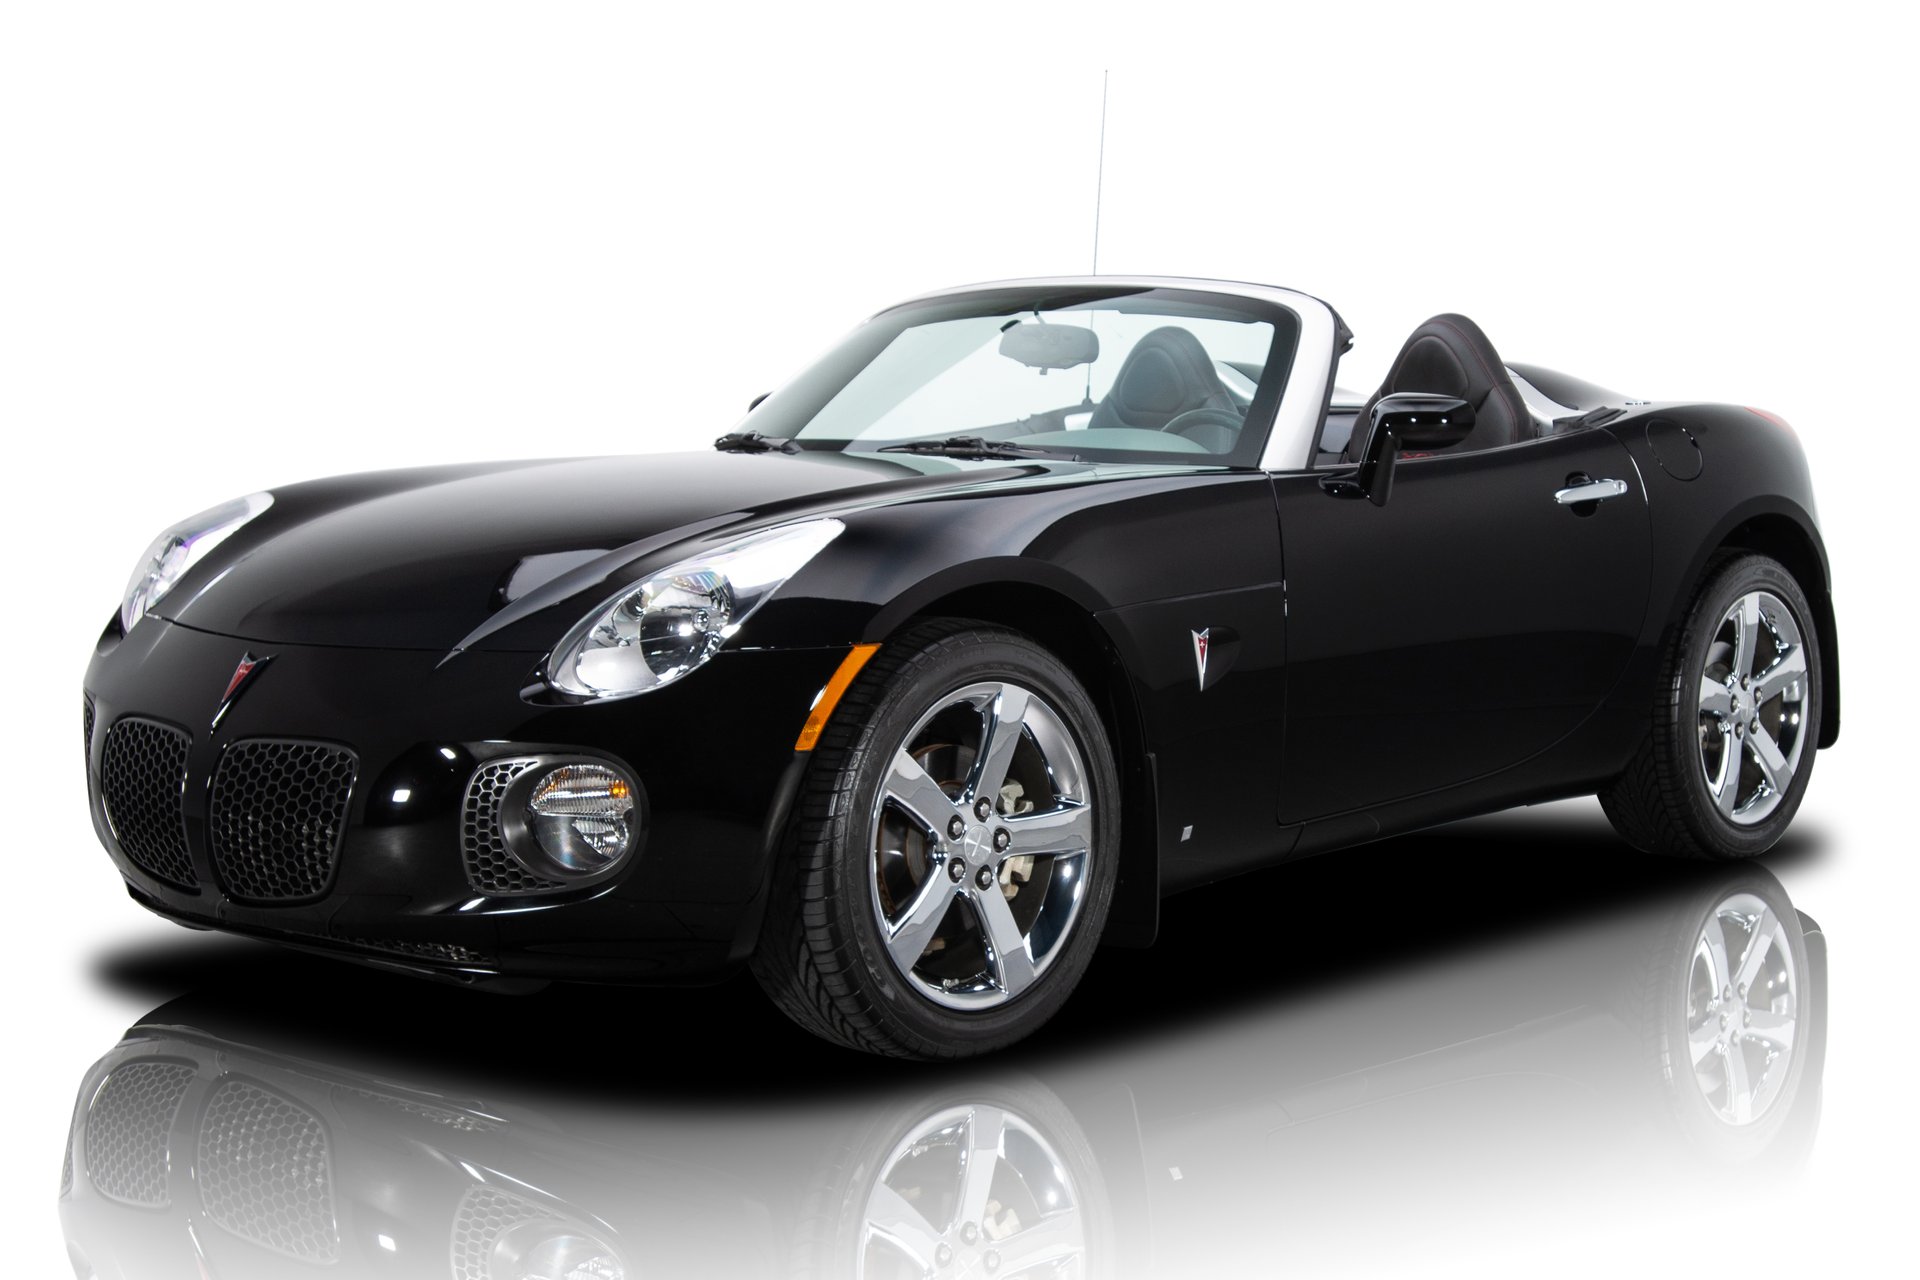 136358 2008 Pontiac Solstice RK Motors Classic Cars and Muscle Cars for Sale